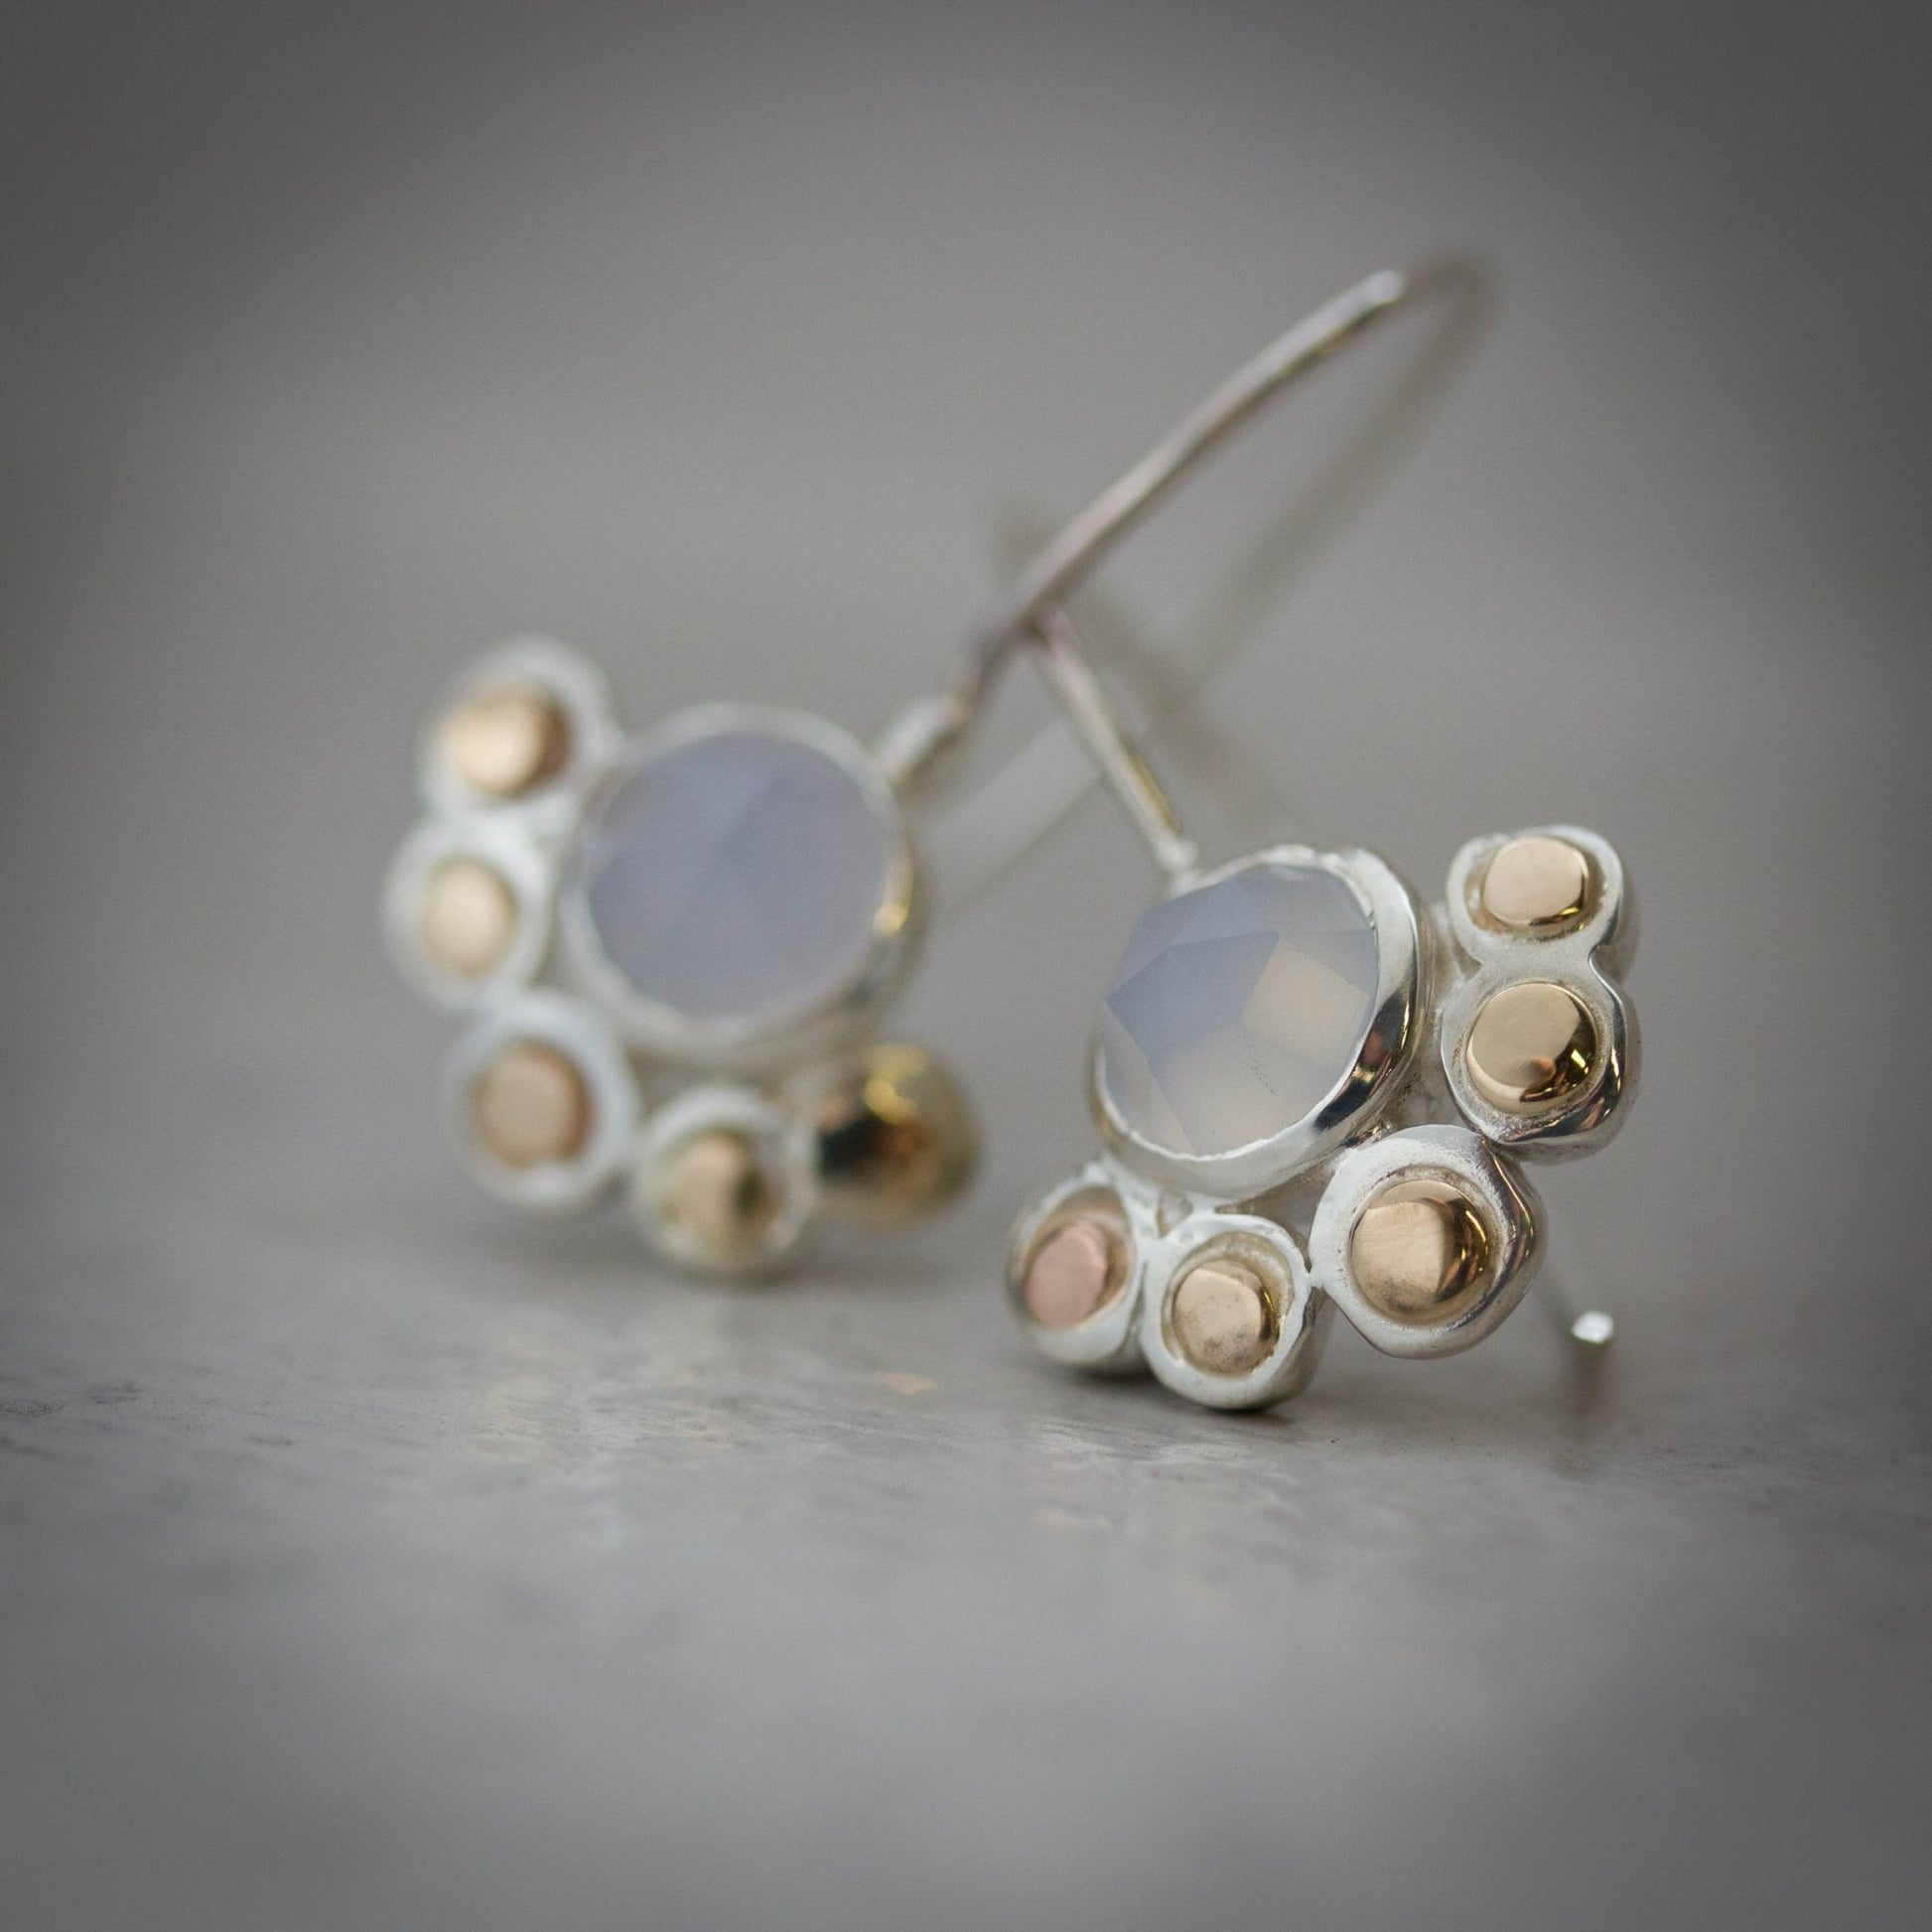 Chalcendony Earrings in Mixed Metals - Madelynn Cassin Designs